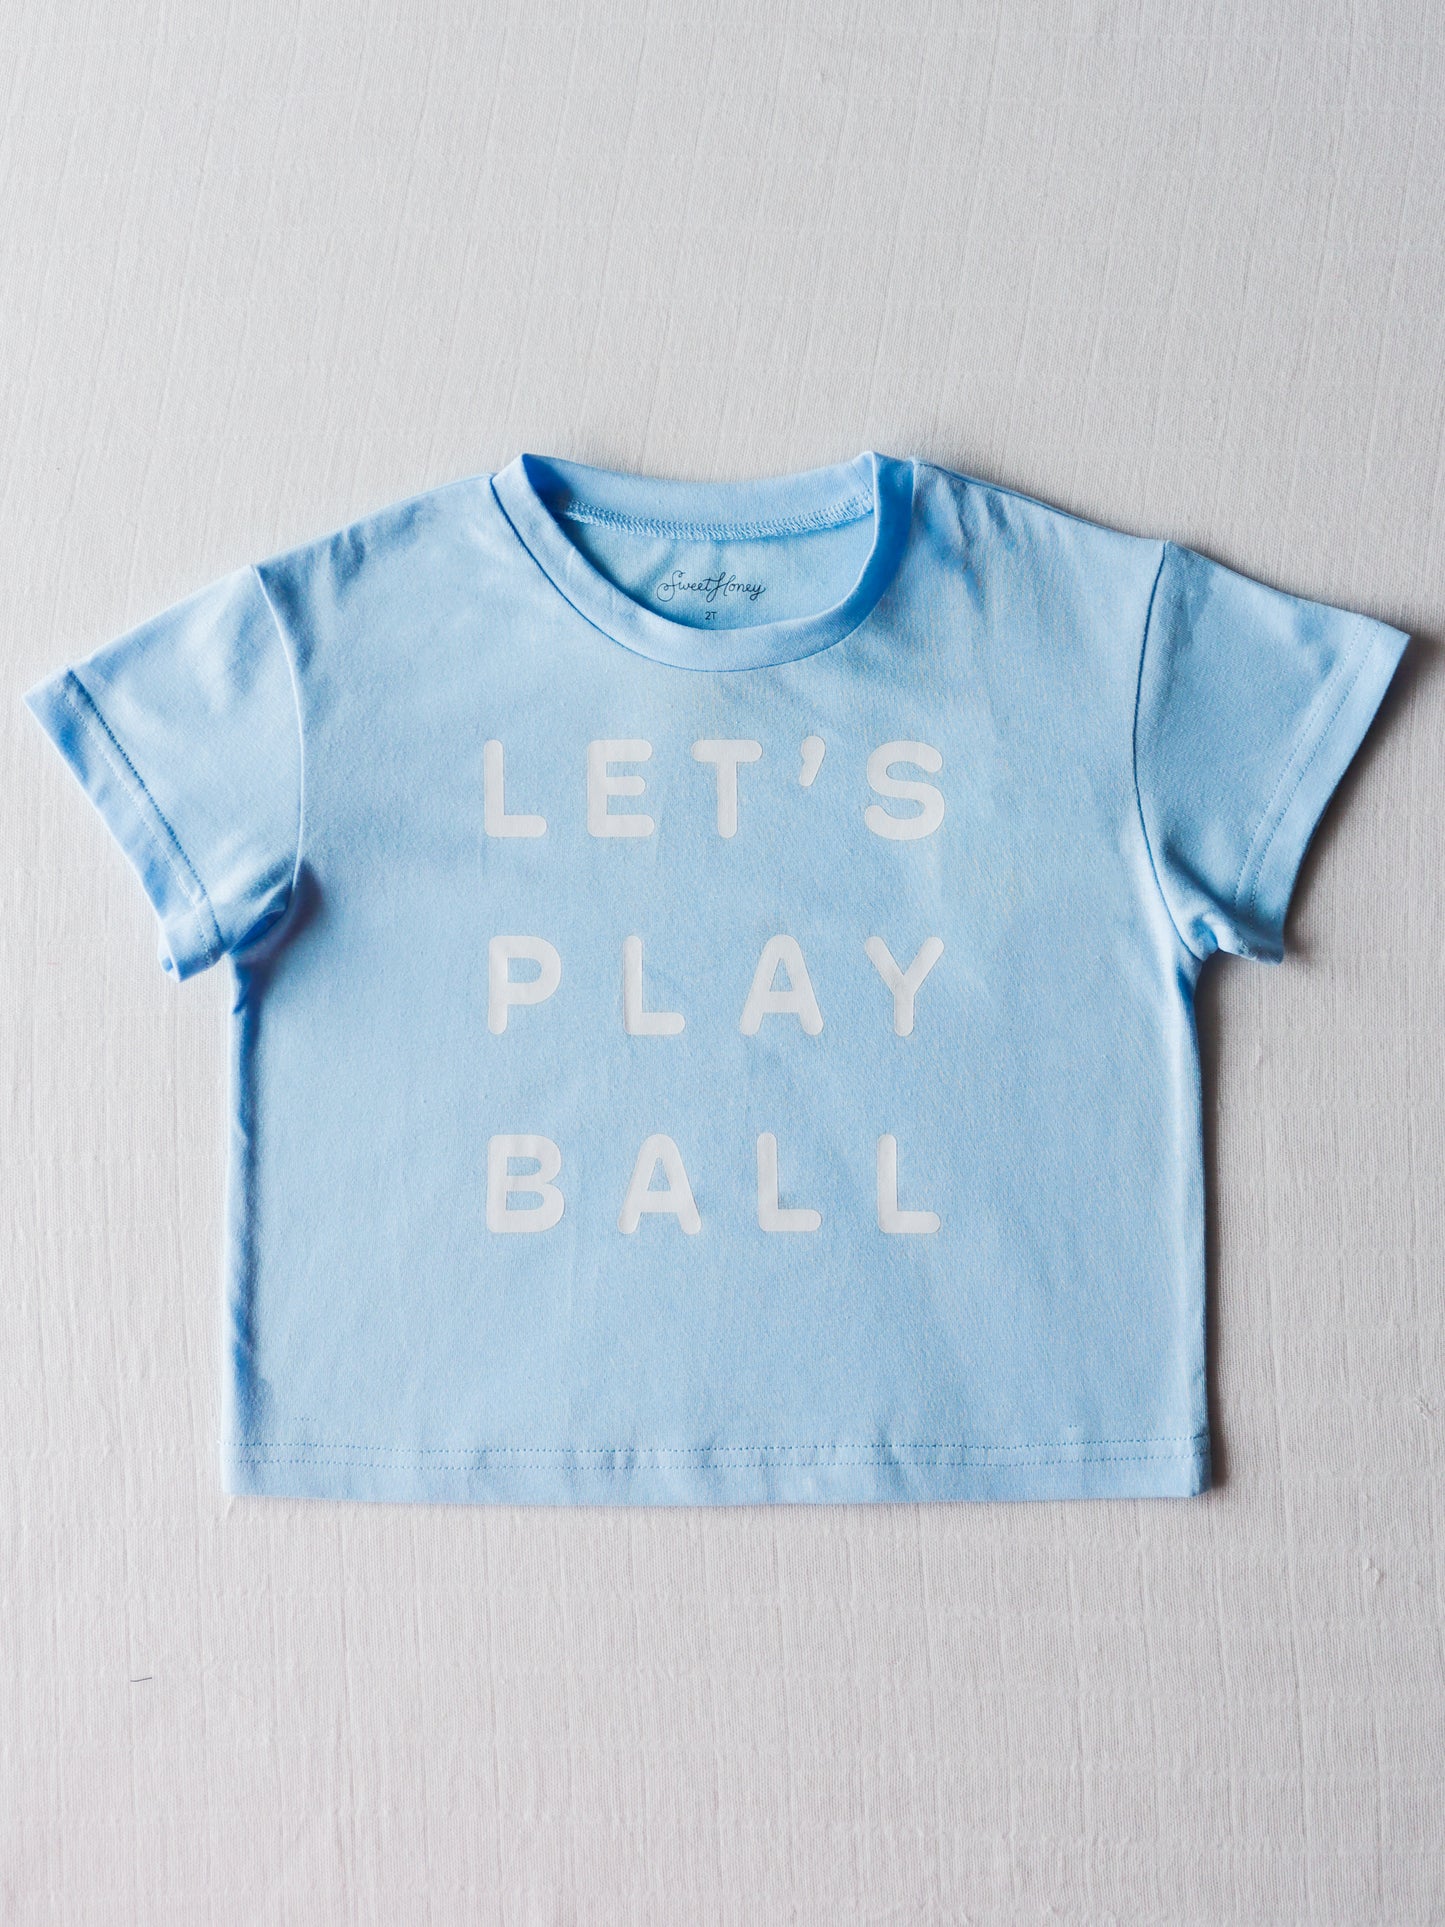 Graphic Tee - Let's Play Ball